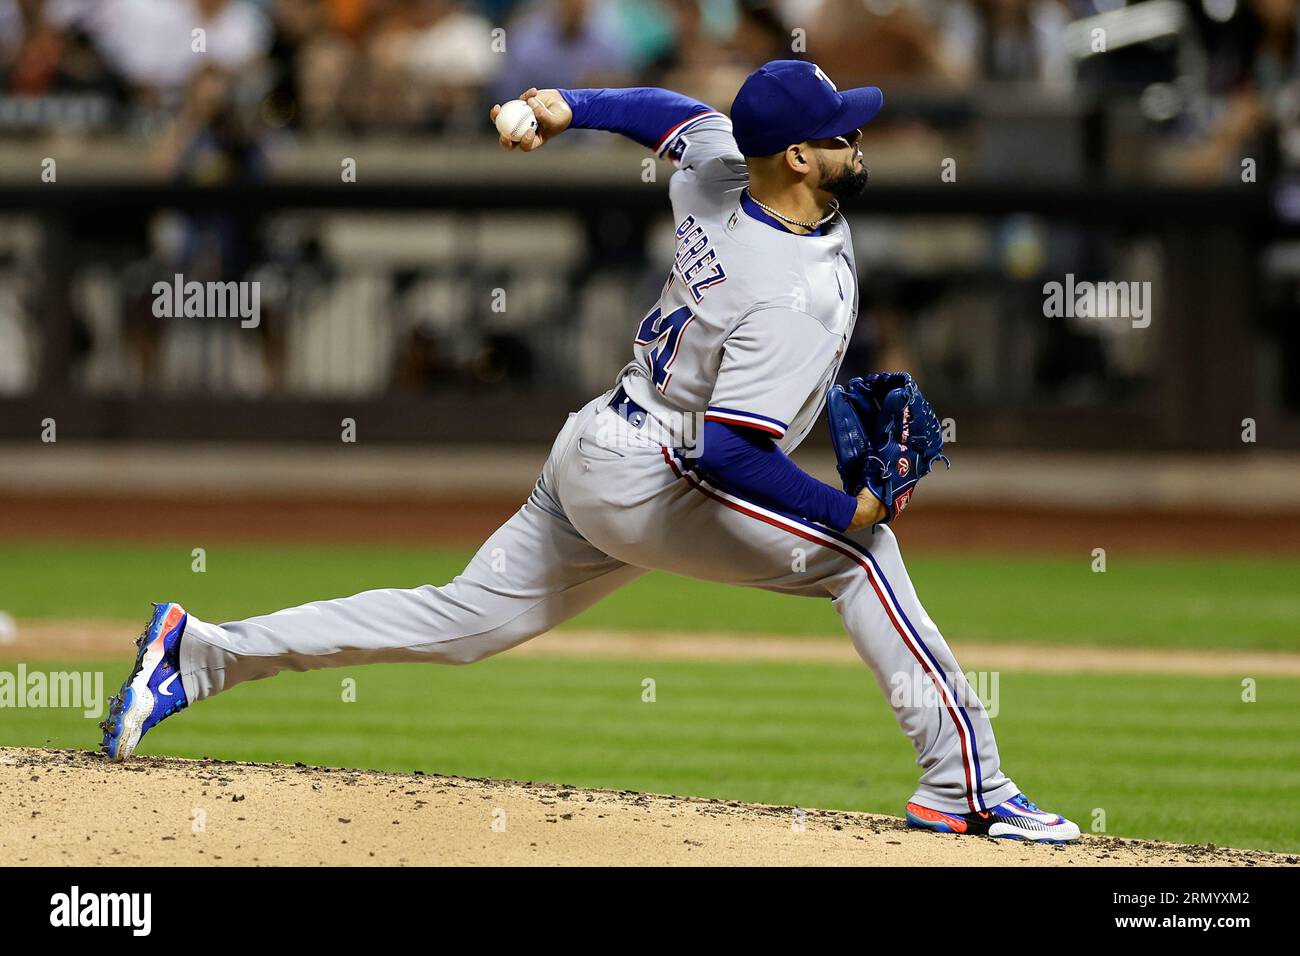 Texas Rangers pitcher Martin Perez (54) pitches against the New